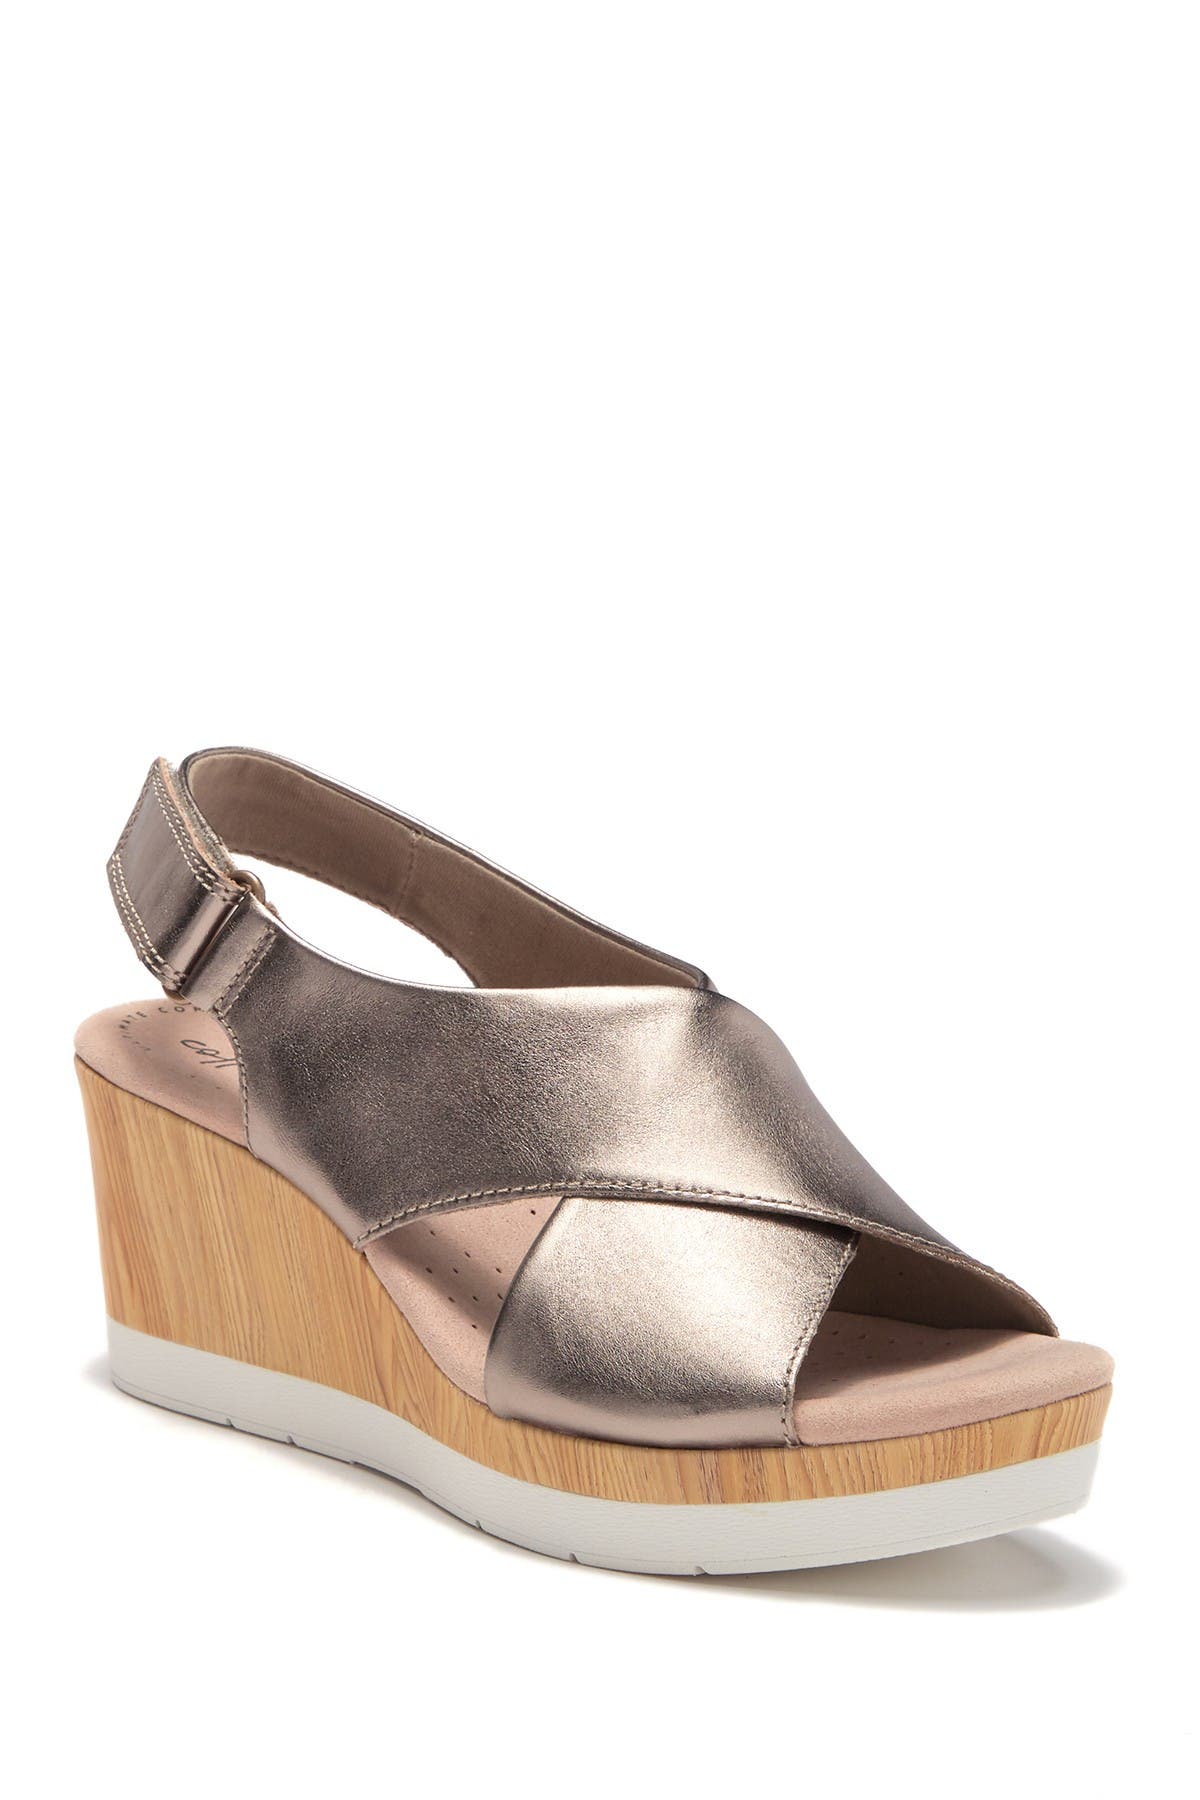 Clarks | Cammy Pearl Wedge Sandal 